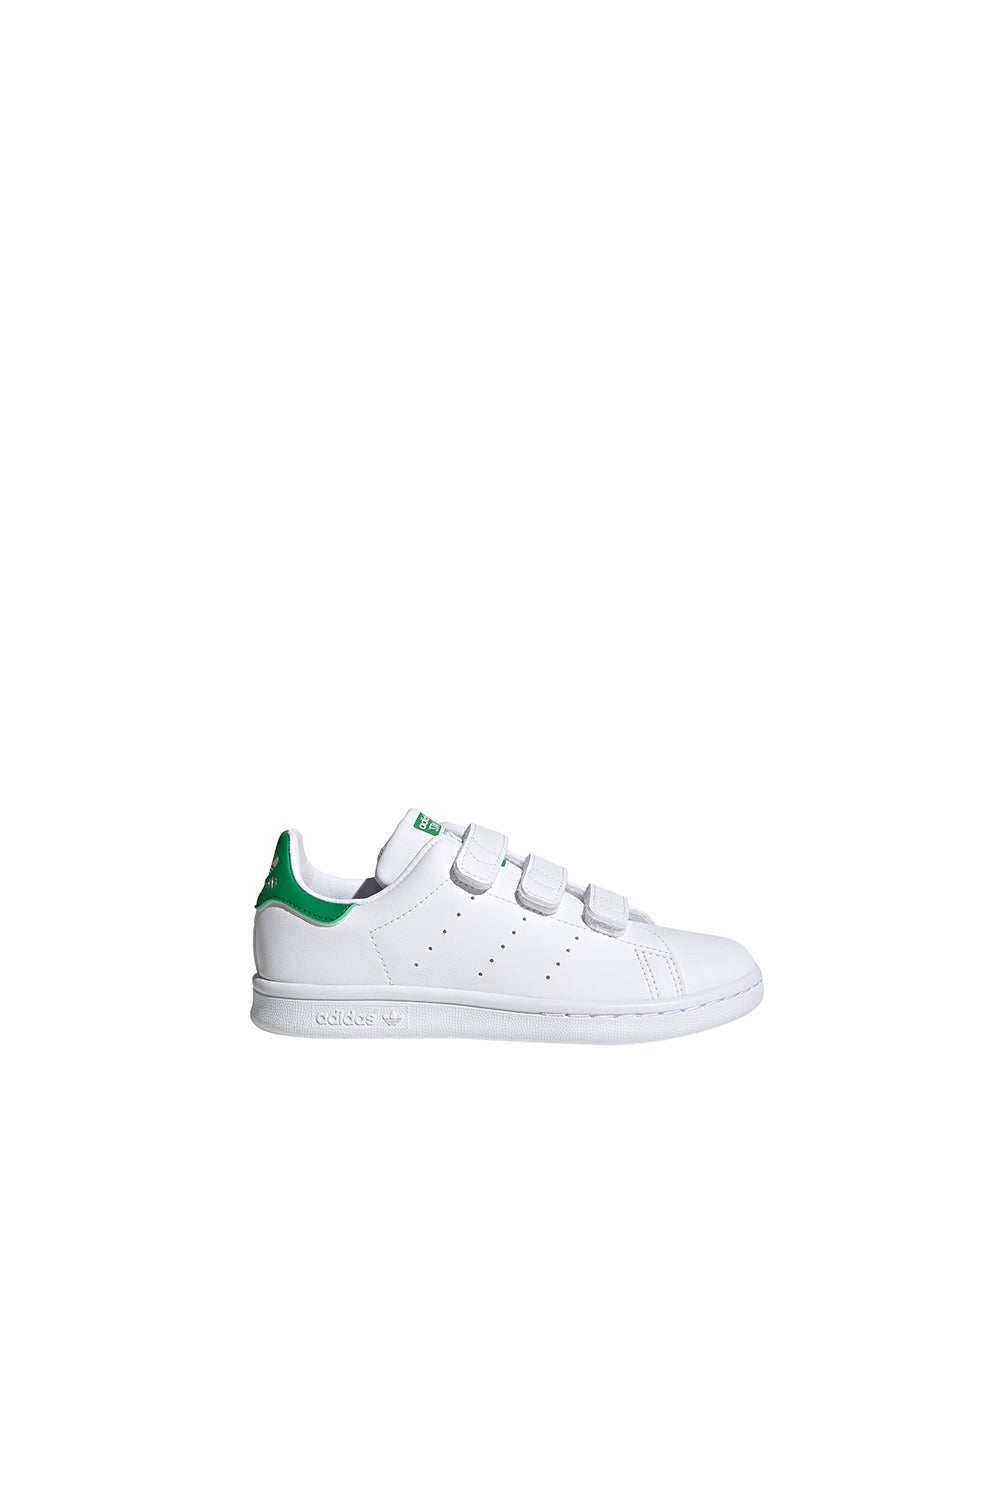 stan smith youth